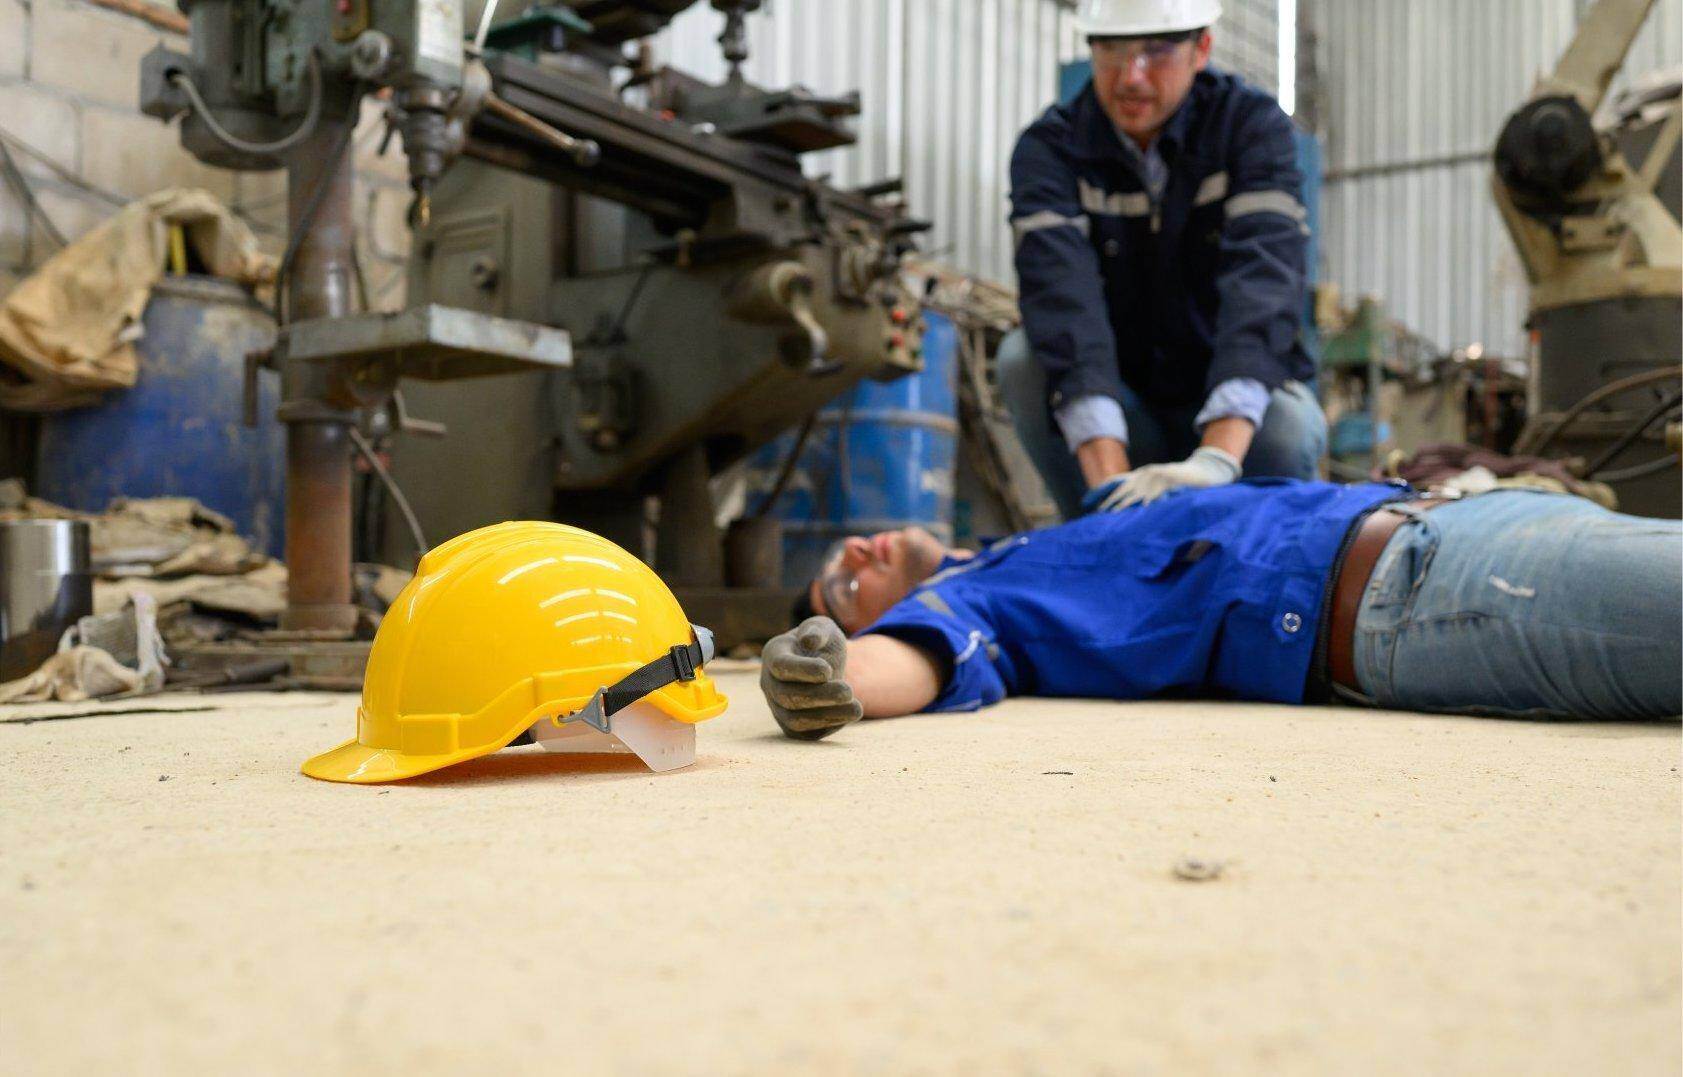 An unconscious man who has been injured on the job who will file for workers compensation in Thomasville, Georgia